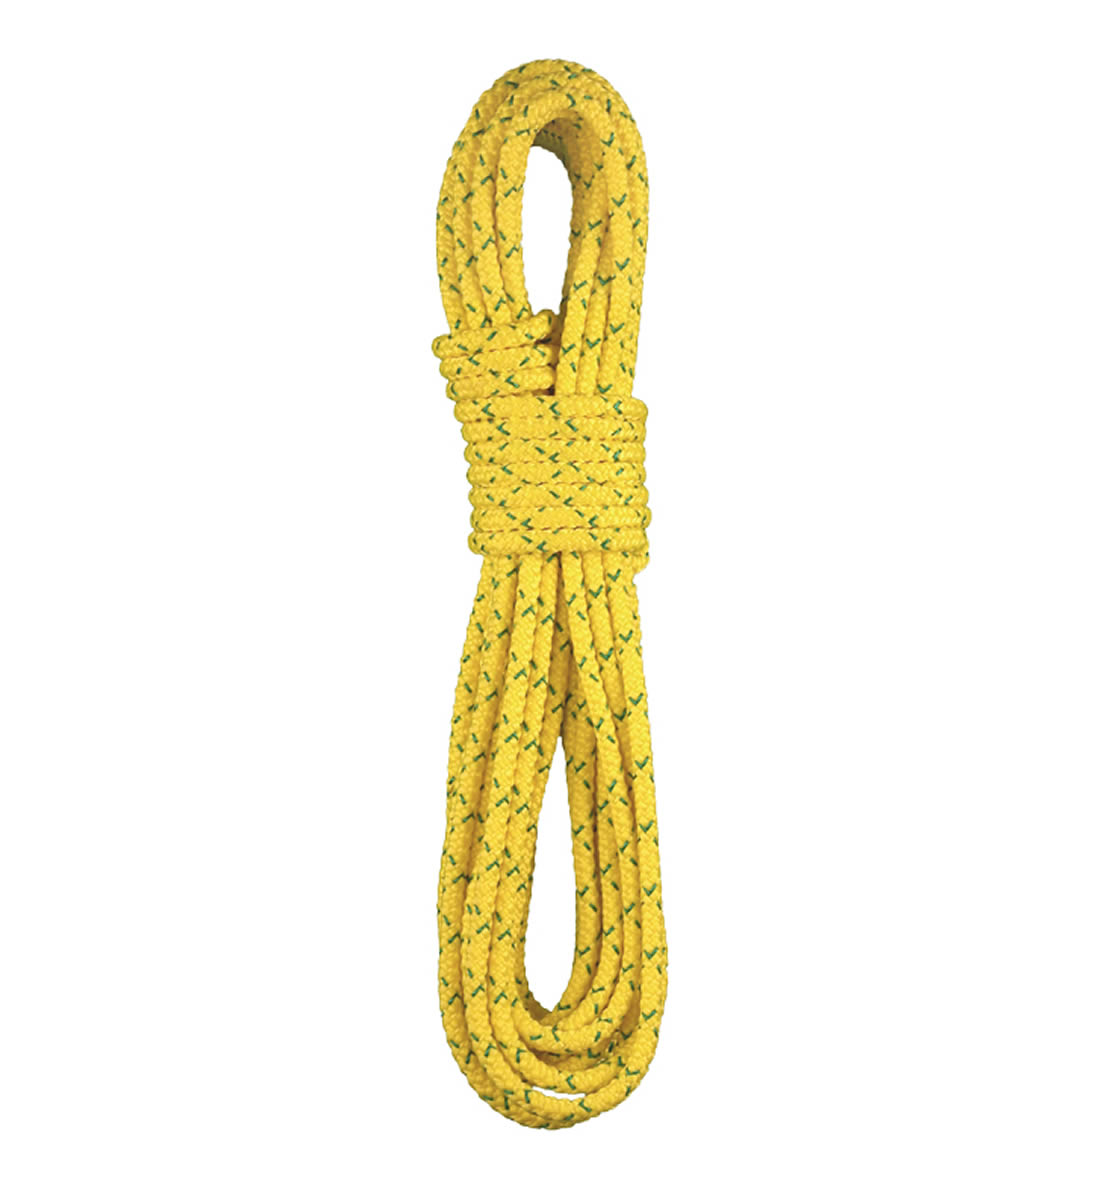 9mm Sure-Grip™ River Rescue Rope with HMPE - BlueWater Ropes